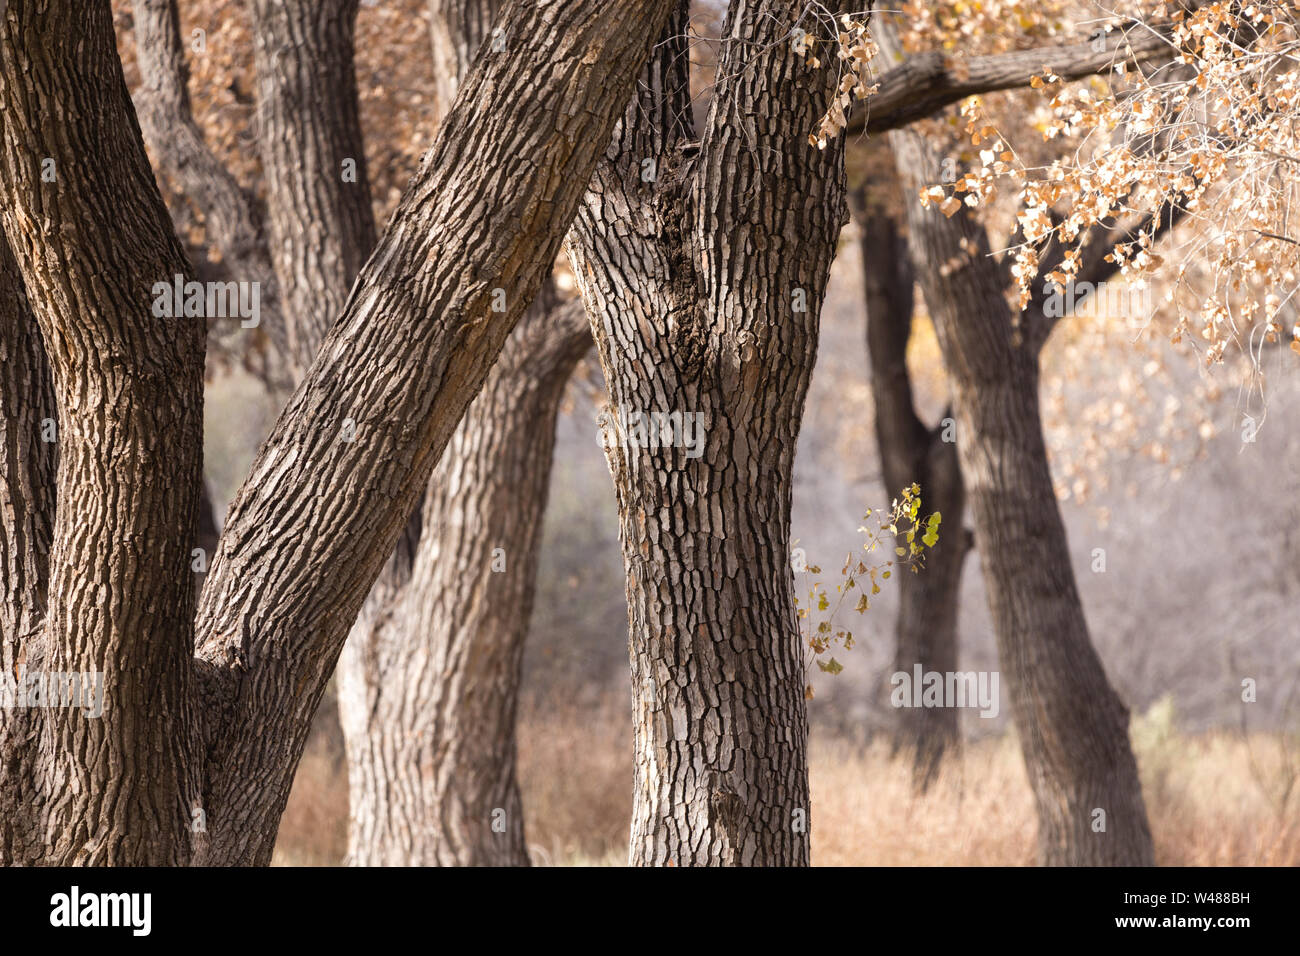 A cottonwood grove with trees receding into the background. Stock Photo